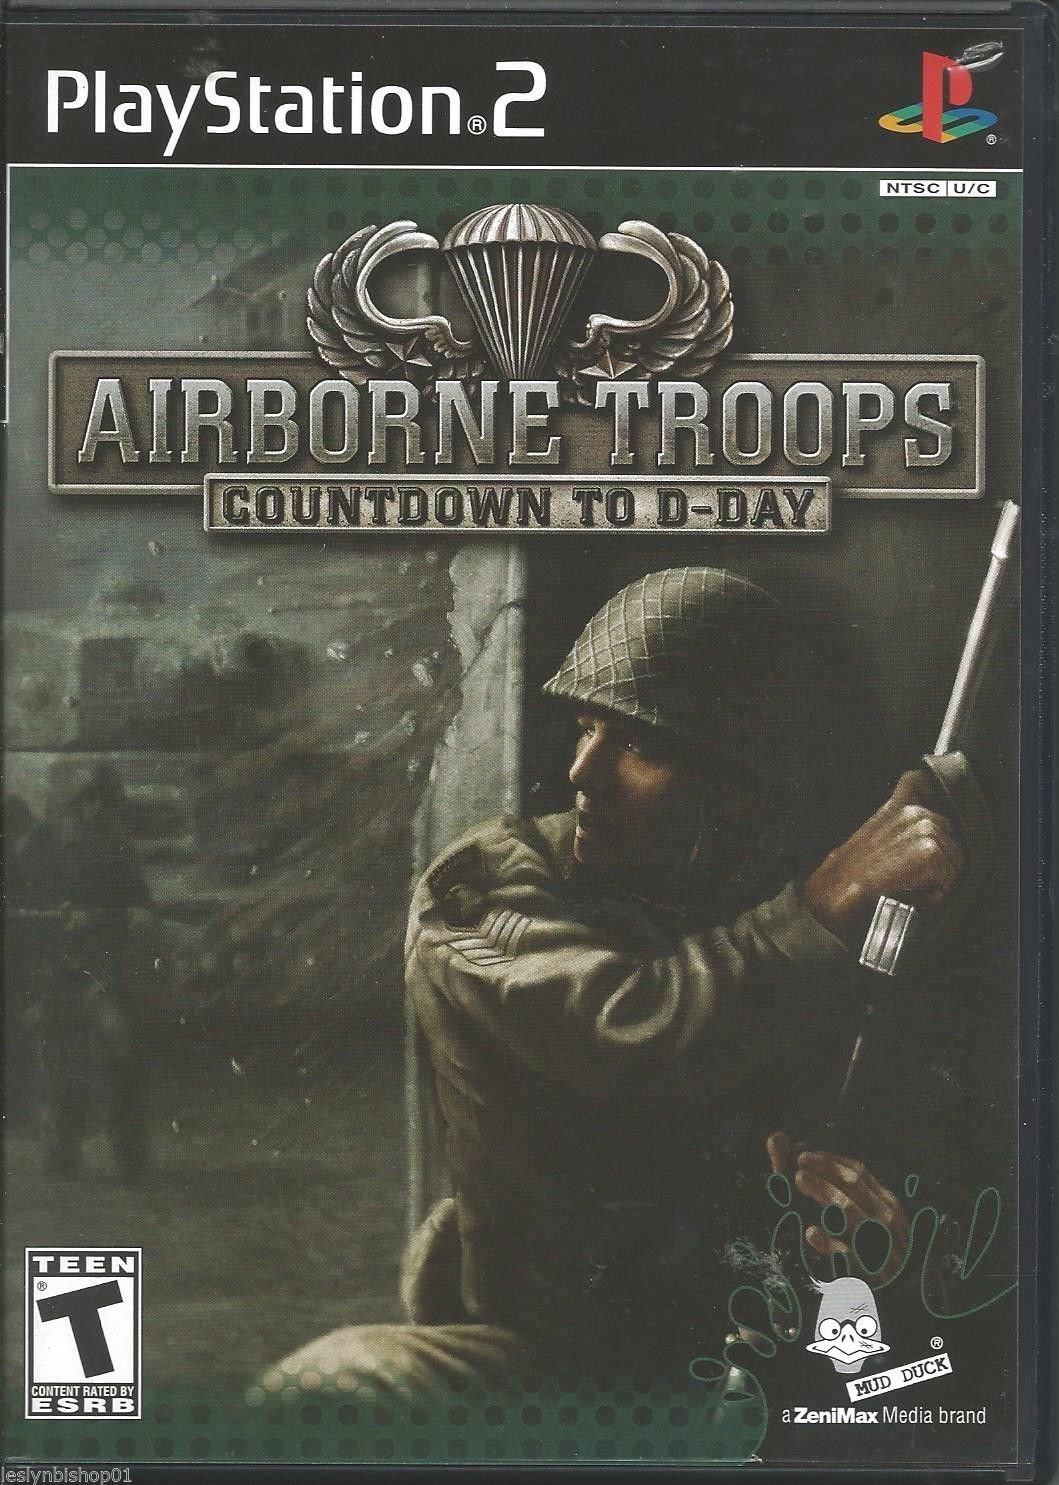 Airborne Troops Countdown bis D-Day - [PS2]